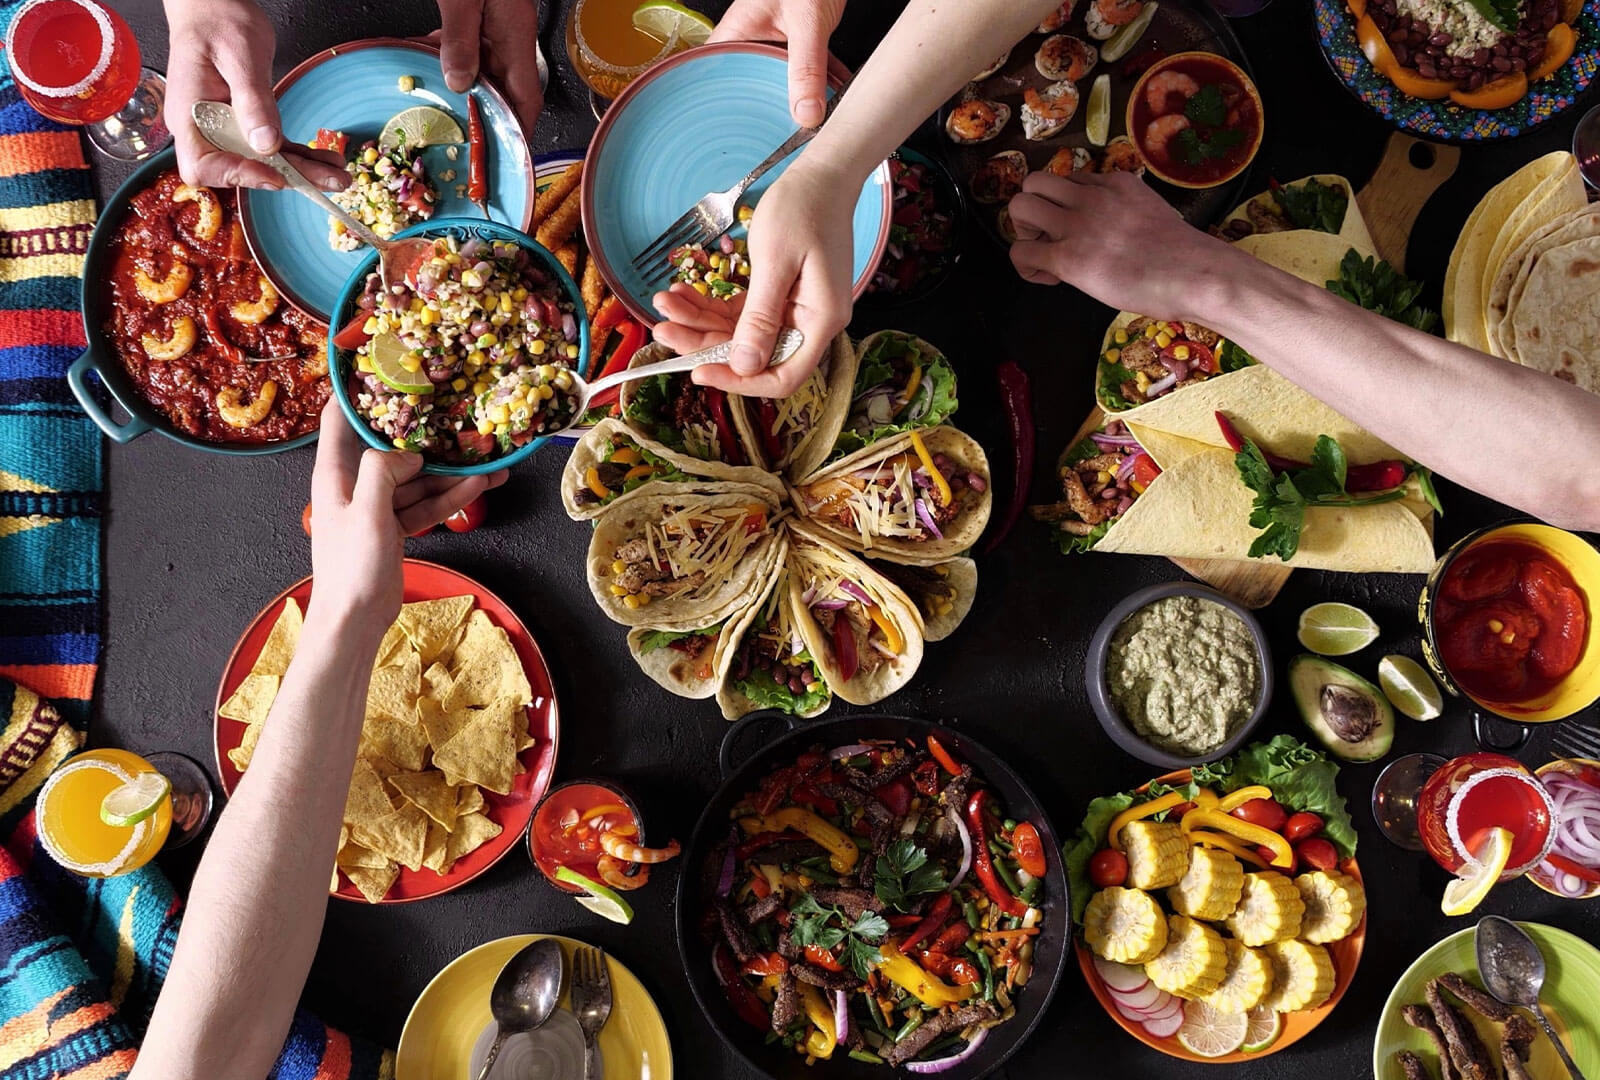 A large traditional Mexican meal people are reaching for